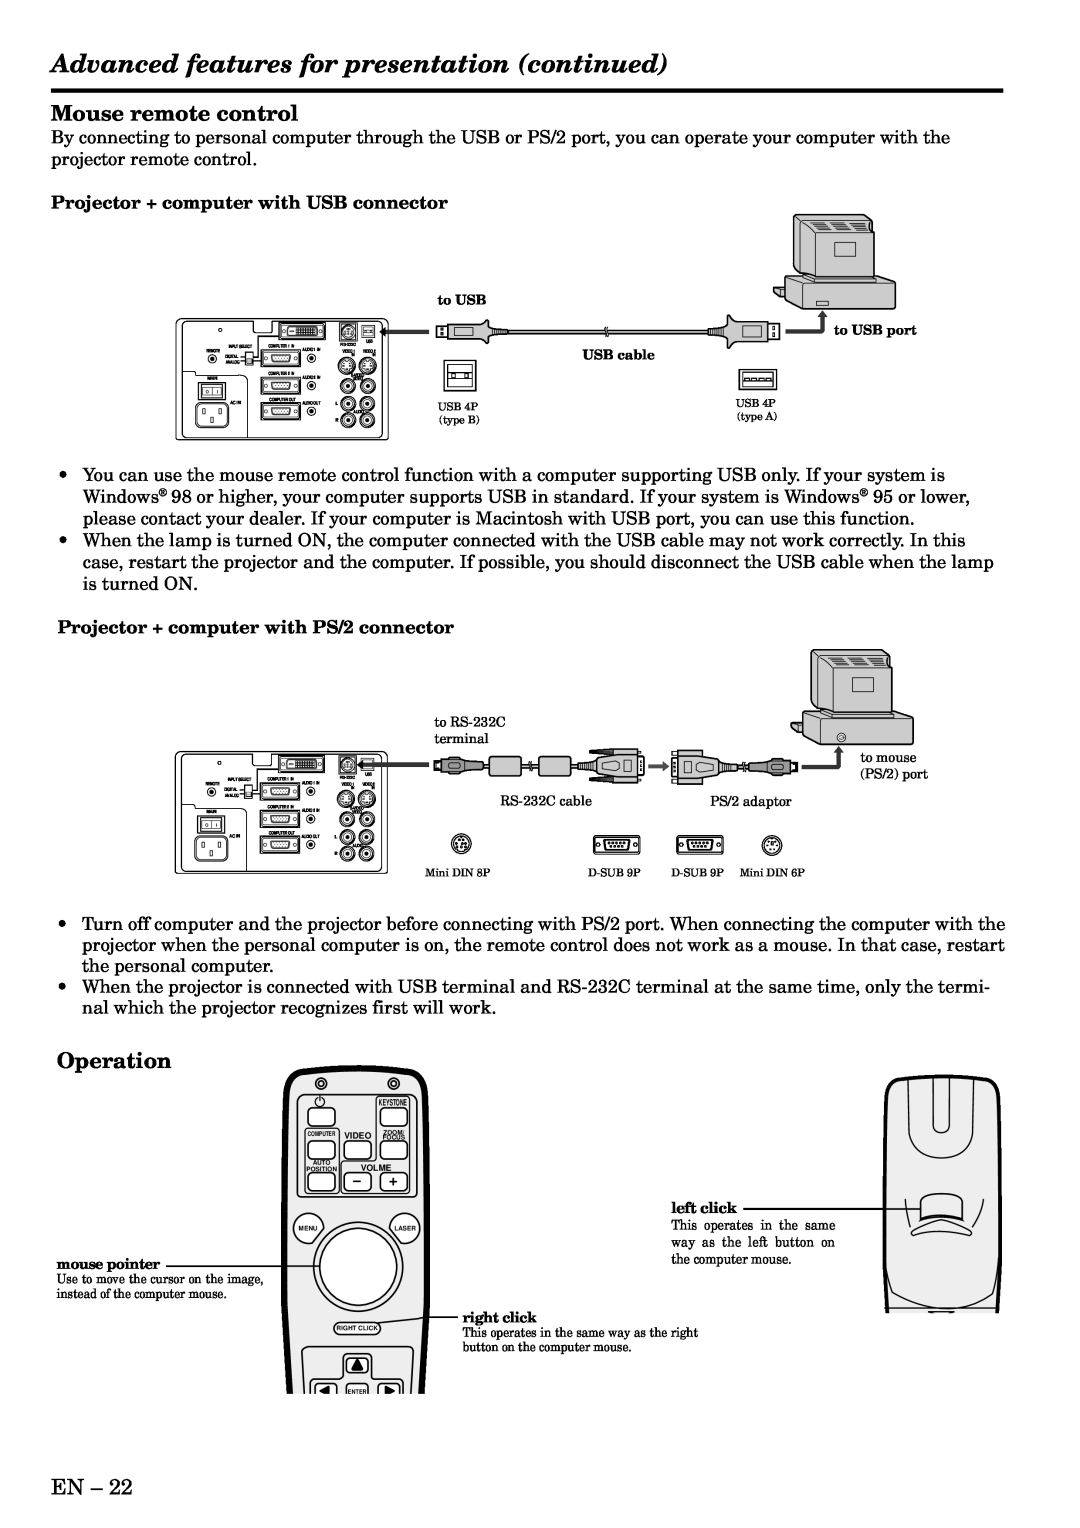 Mitsubishi Electronics LVP-X400U user manual Advanced features for presentation continued, Mouse remote control, Operation 